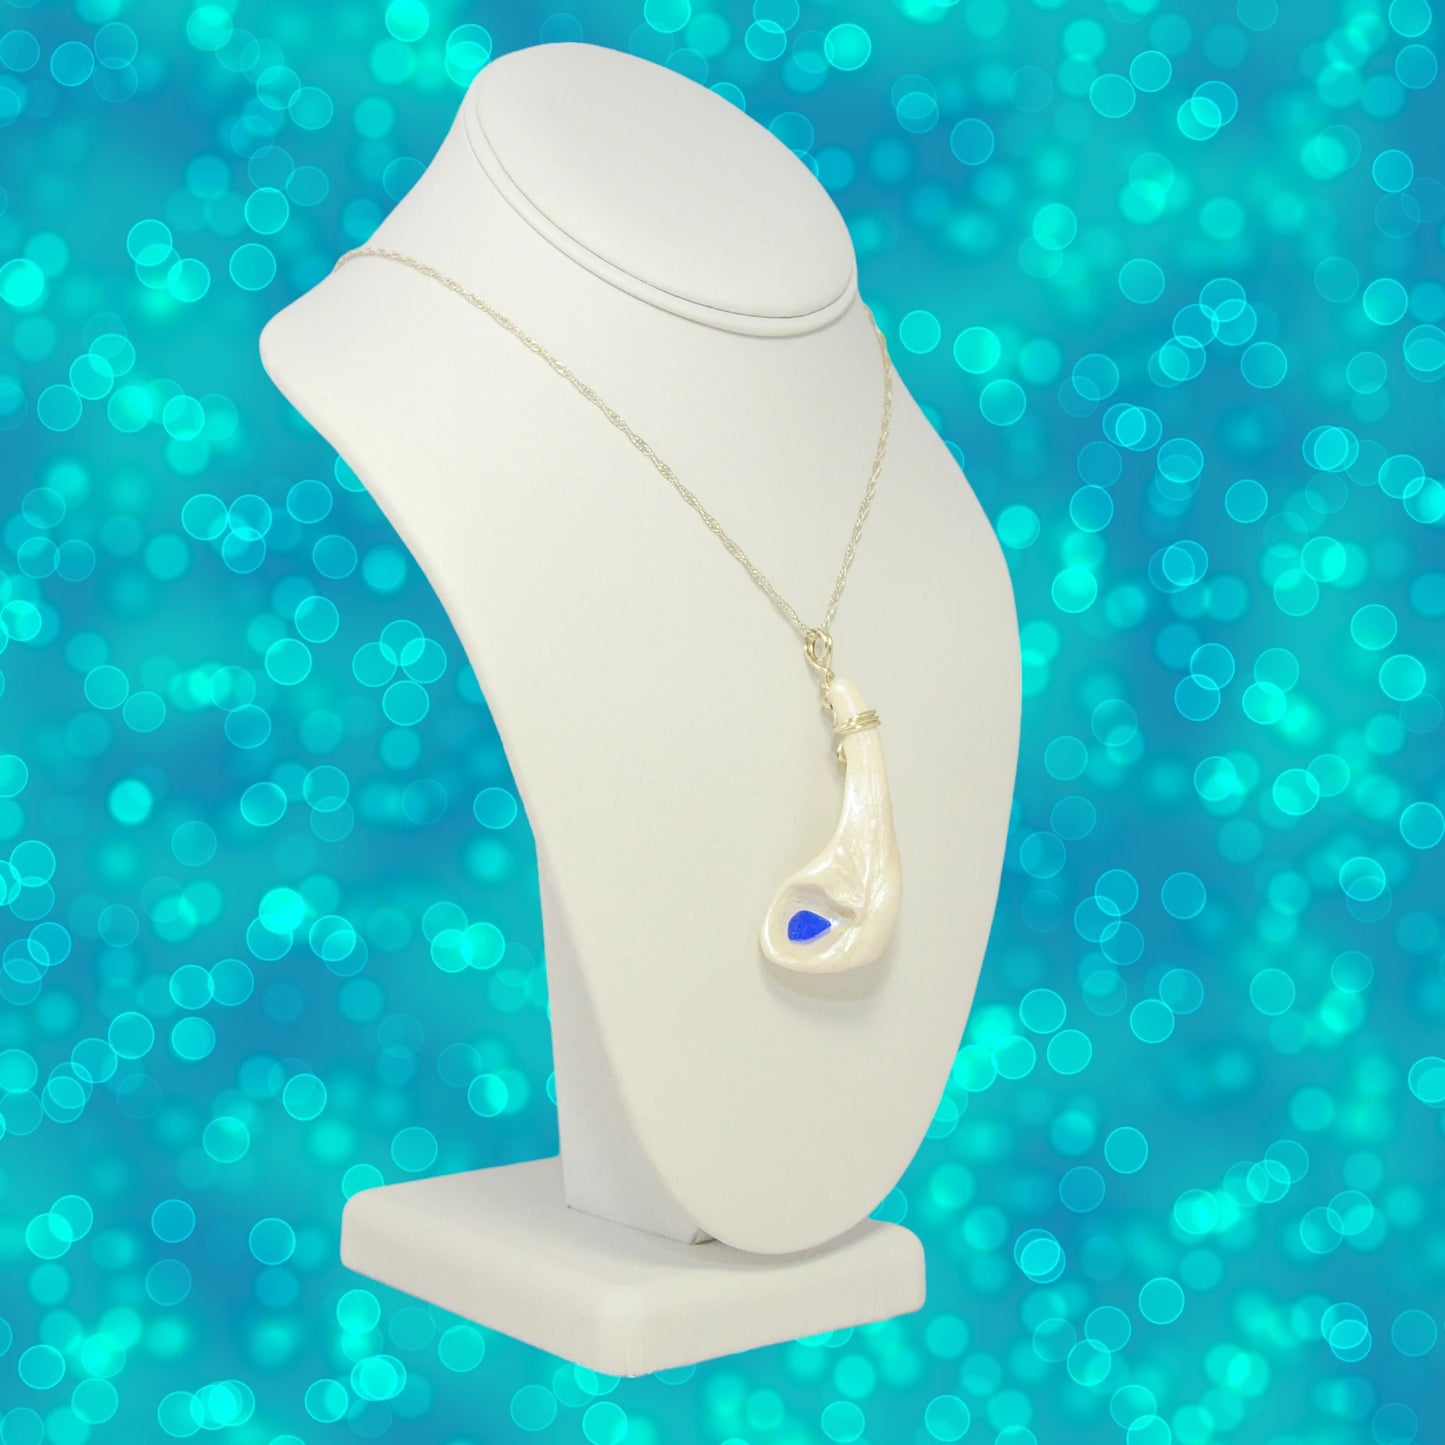 The Cobalt pendant is shown hanging from a chain on a necklace displayer.  The pendant is turned to the viewer can see the angle of the pendant when worn. The background is turquoise blue in a bokeh format.